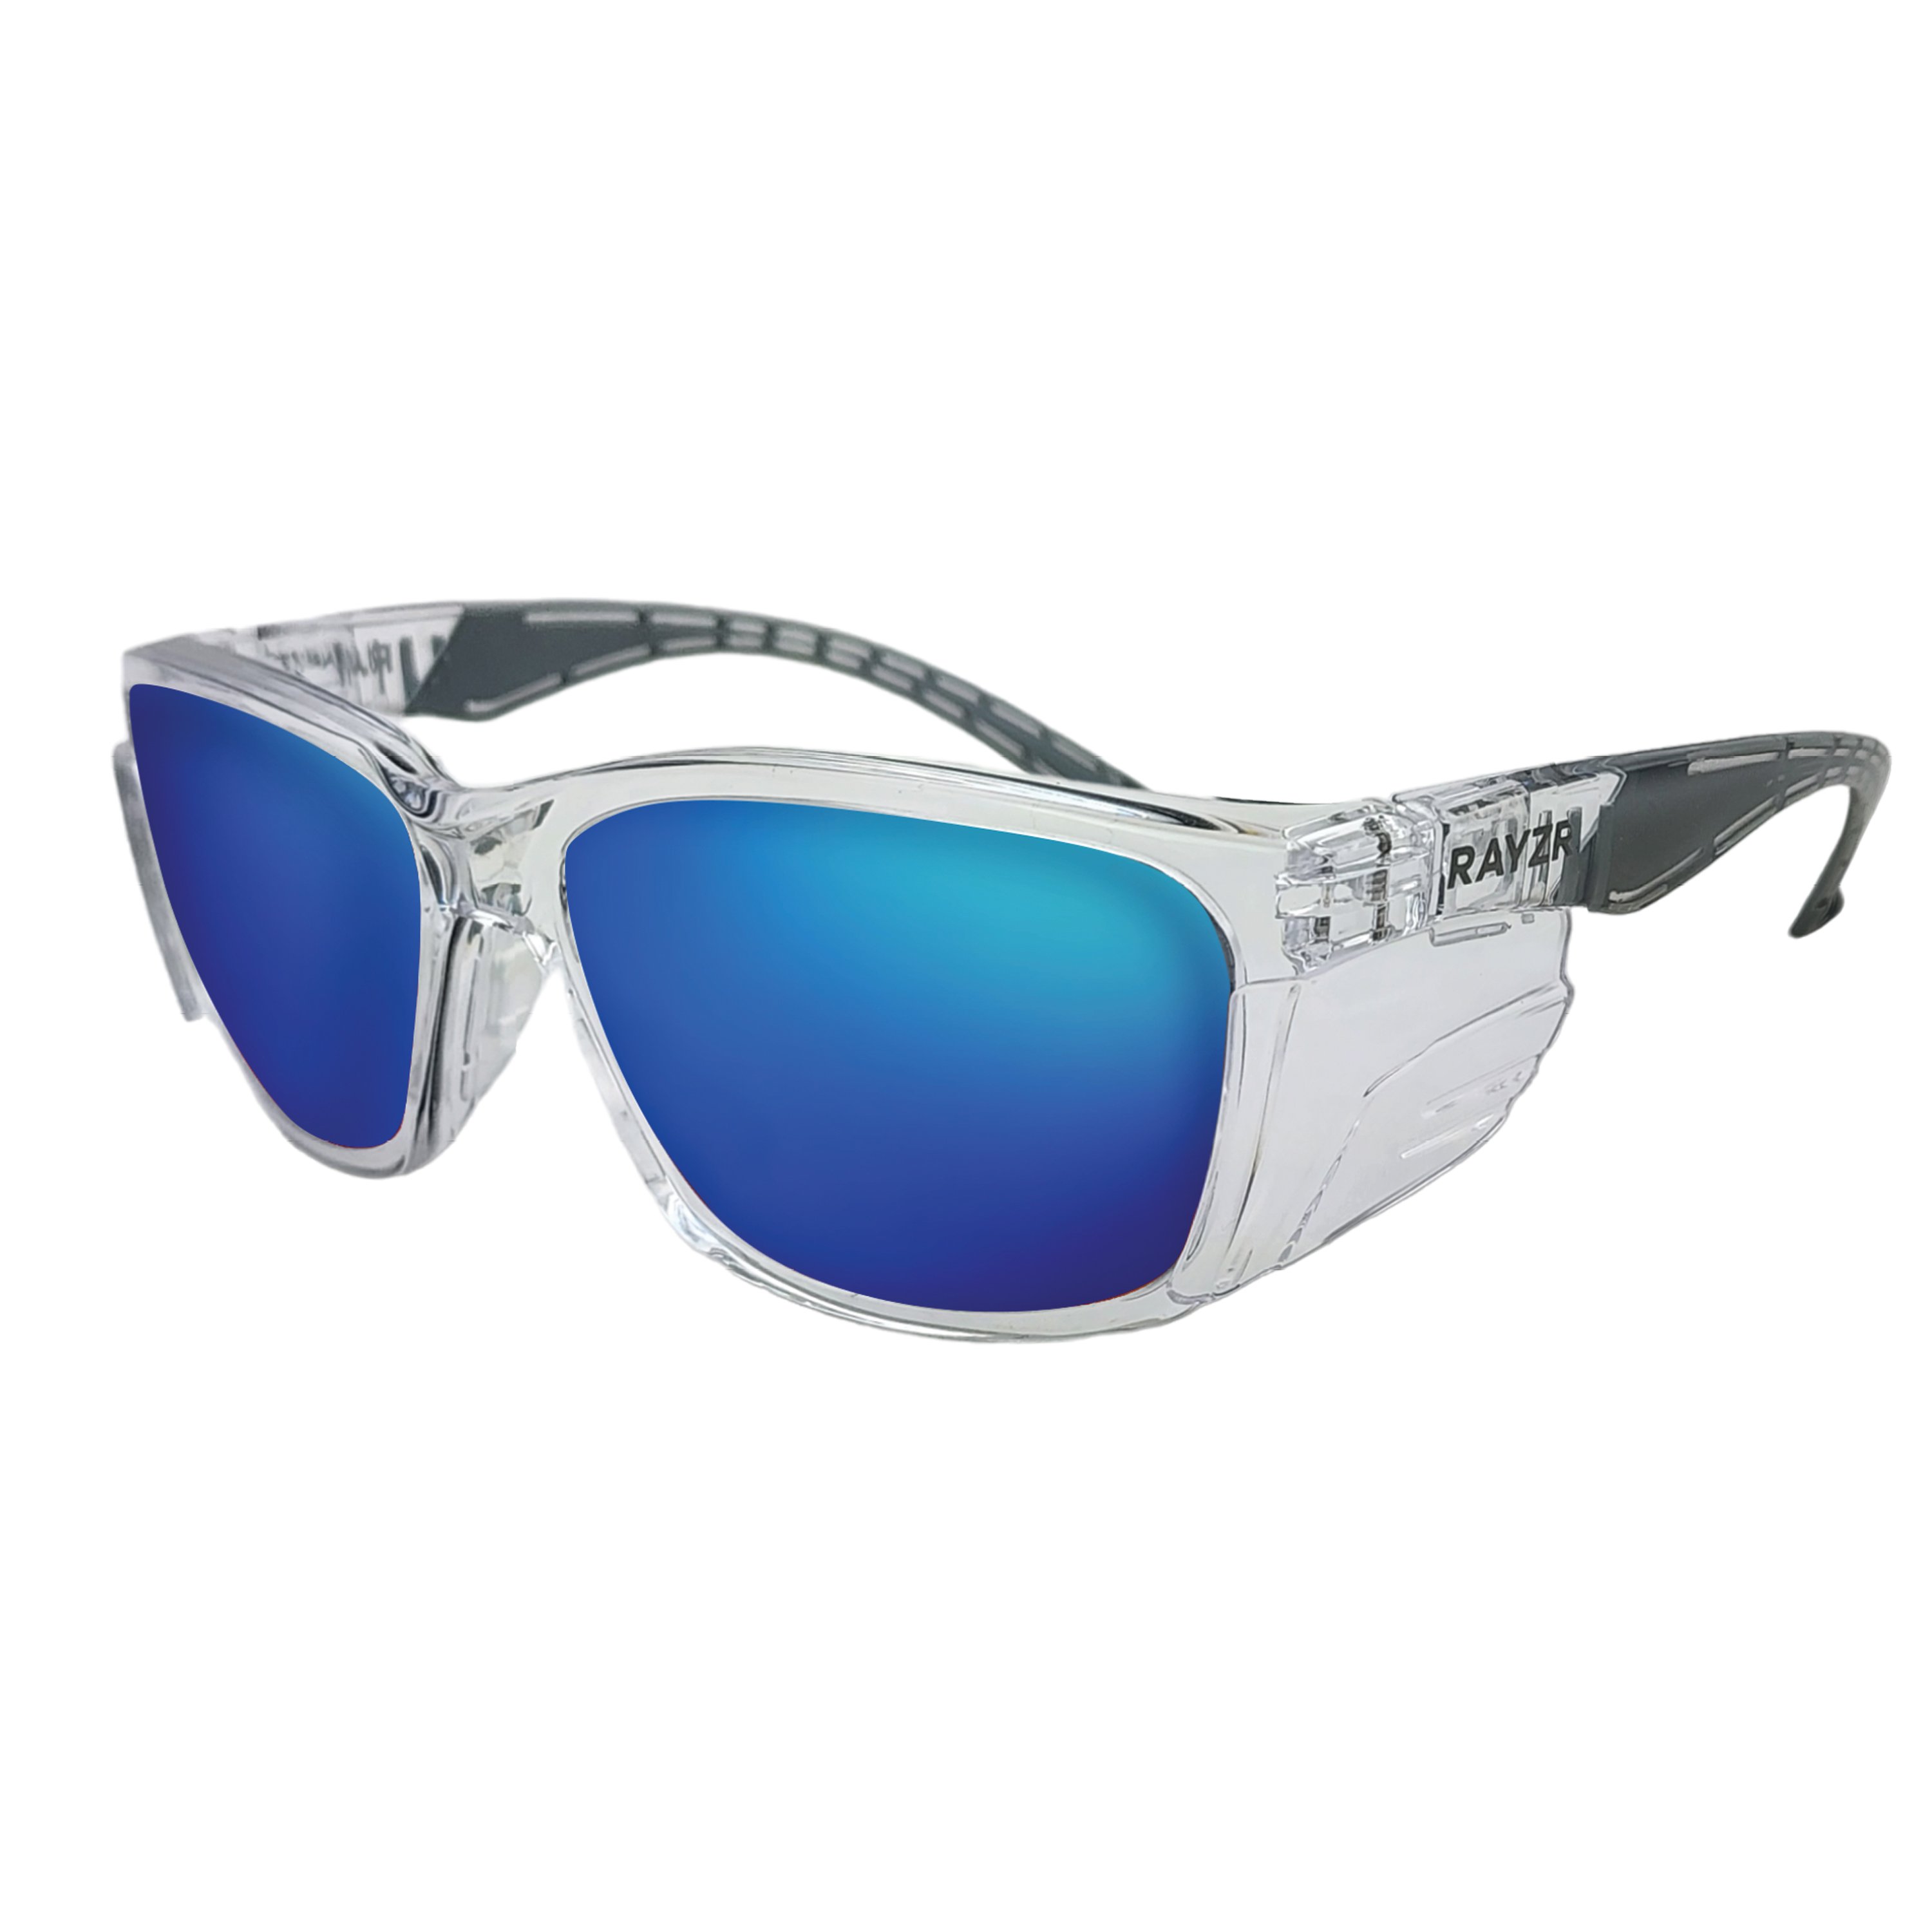 RAYZR SAFETY GLASSES - BLUE MIRROR - CLEAR FRAME - POLARISED